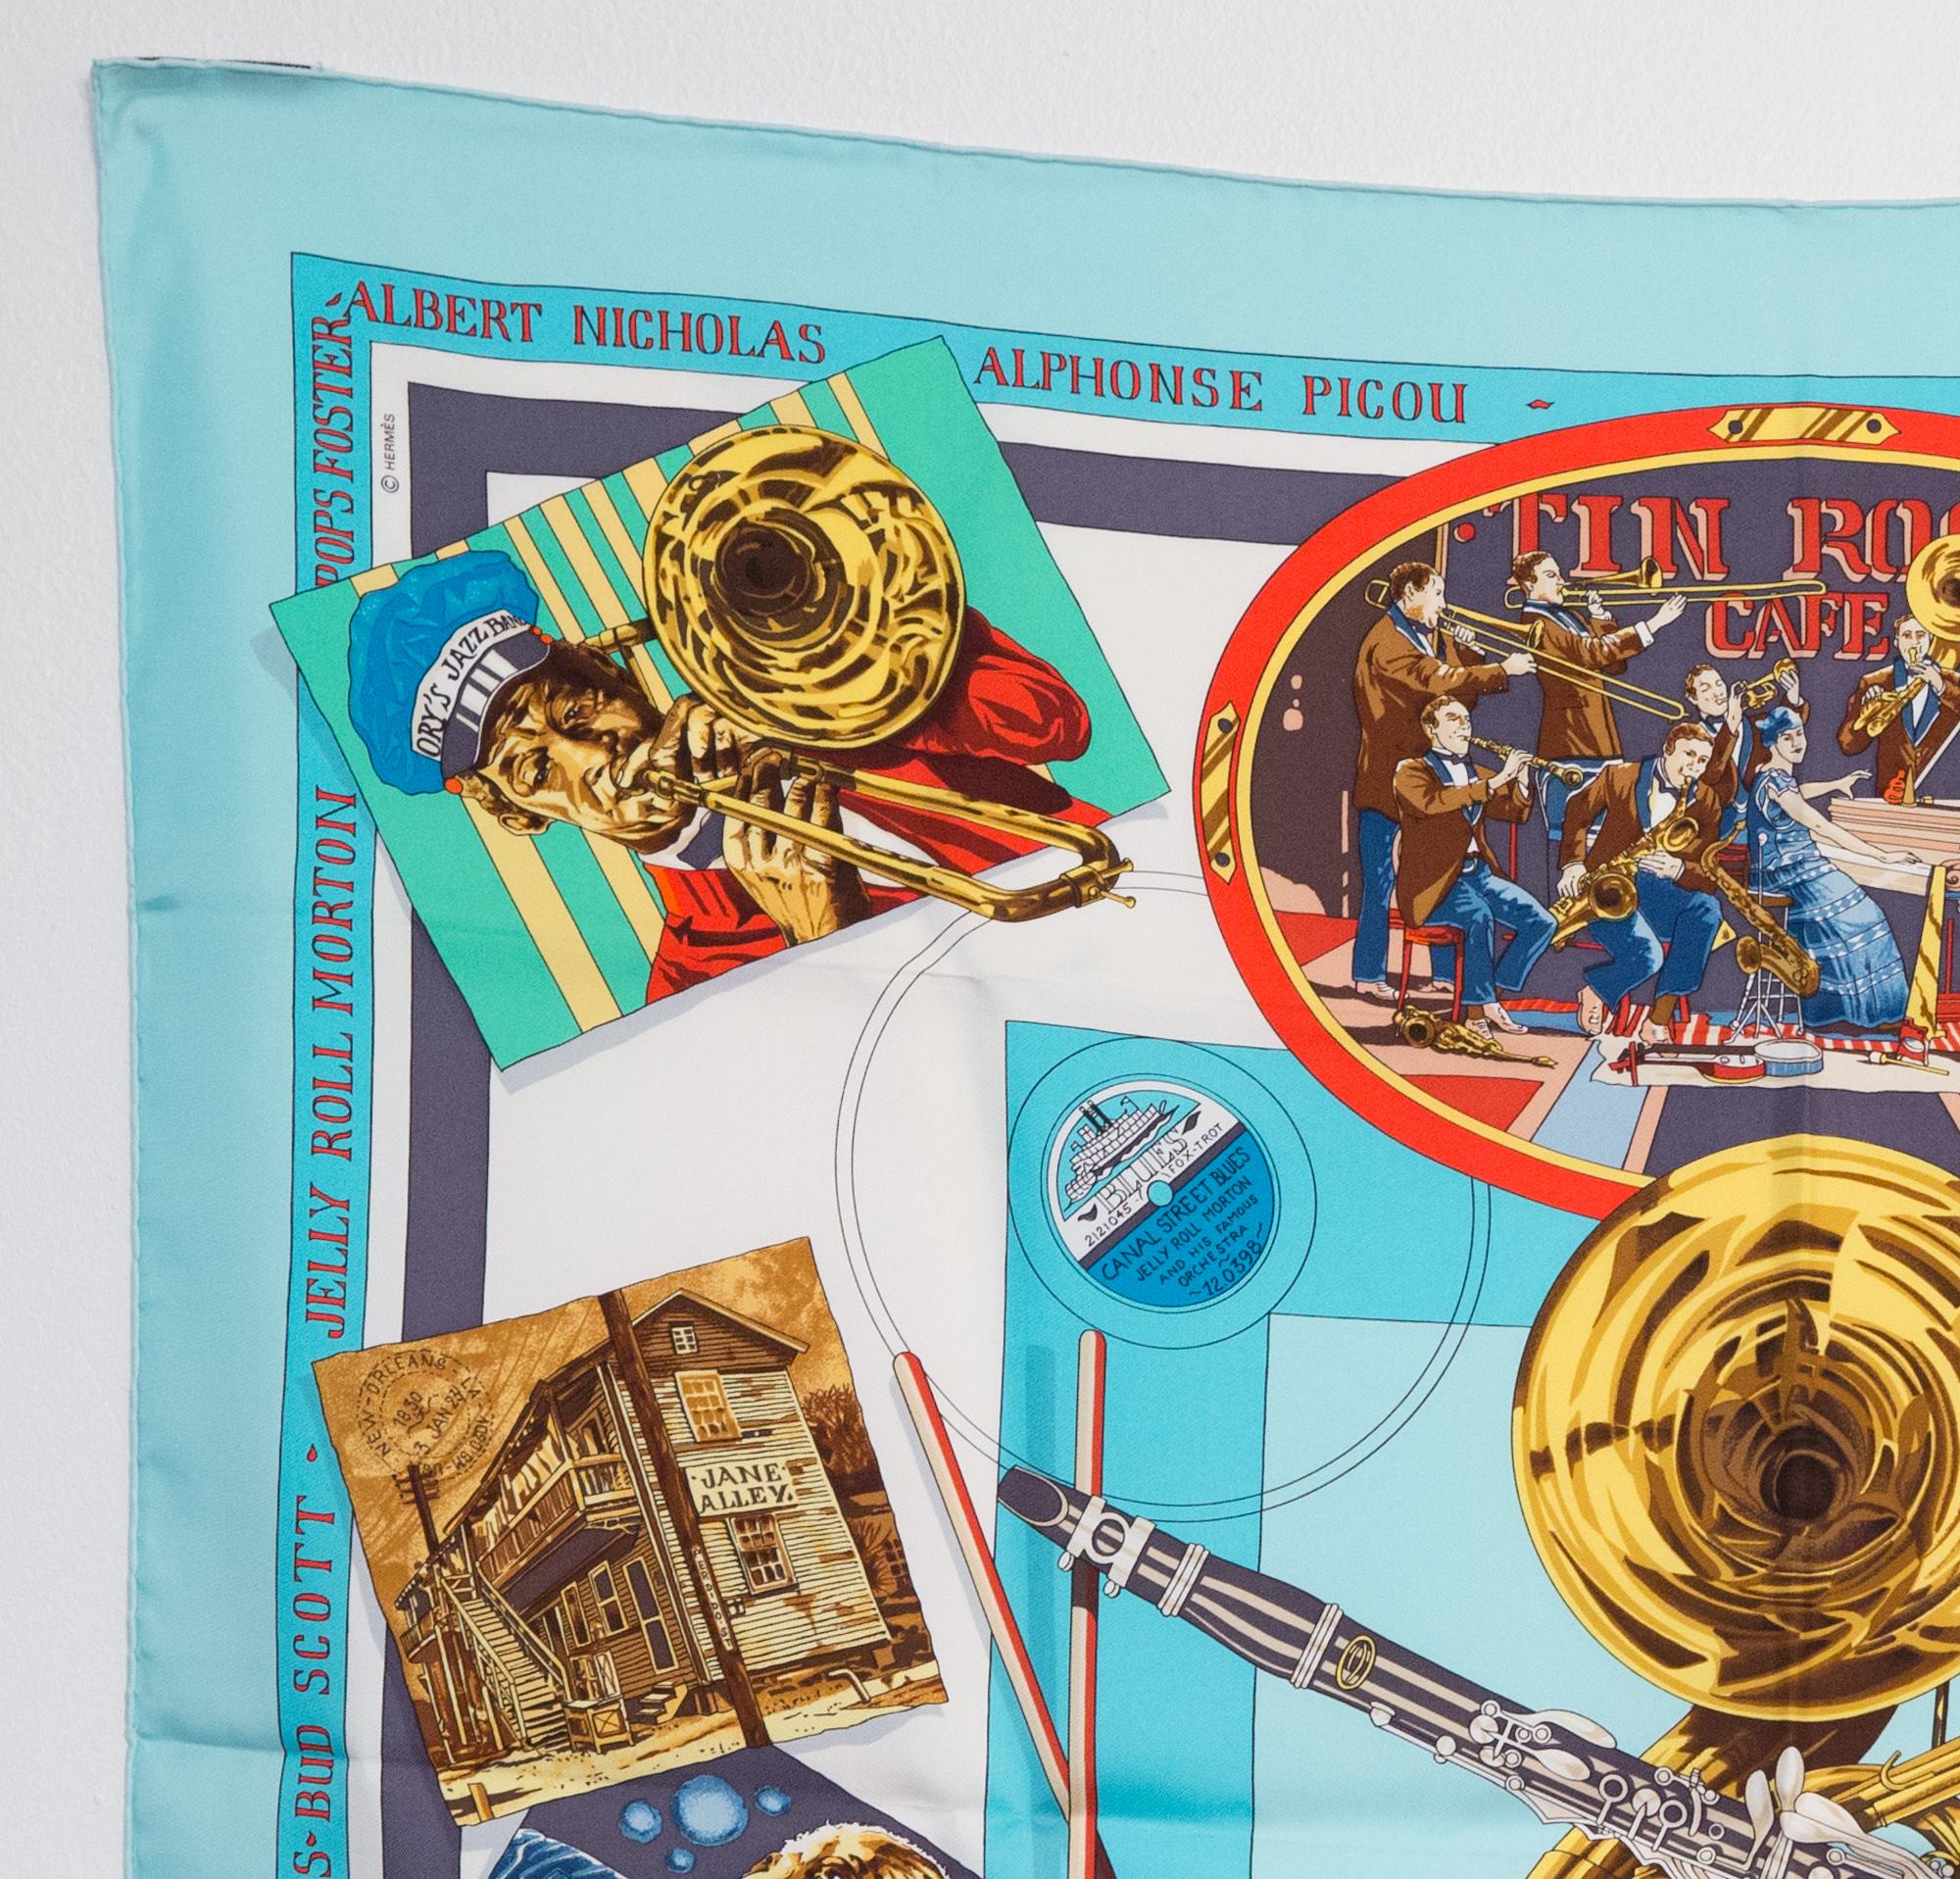 Hermes silk scarf New Orleans Creole Jazz 1923 by Loïc Dubigeon featuring a turquoise border. First edition 1996.
In excellent vintage condition. Made in France.
35,4in. (90cm)  X 35,4in. (90cm)
We guarantee you will receive this  iconic item as